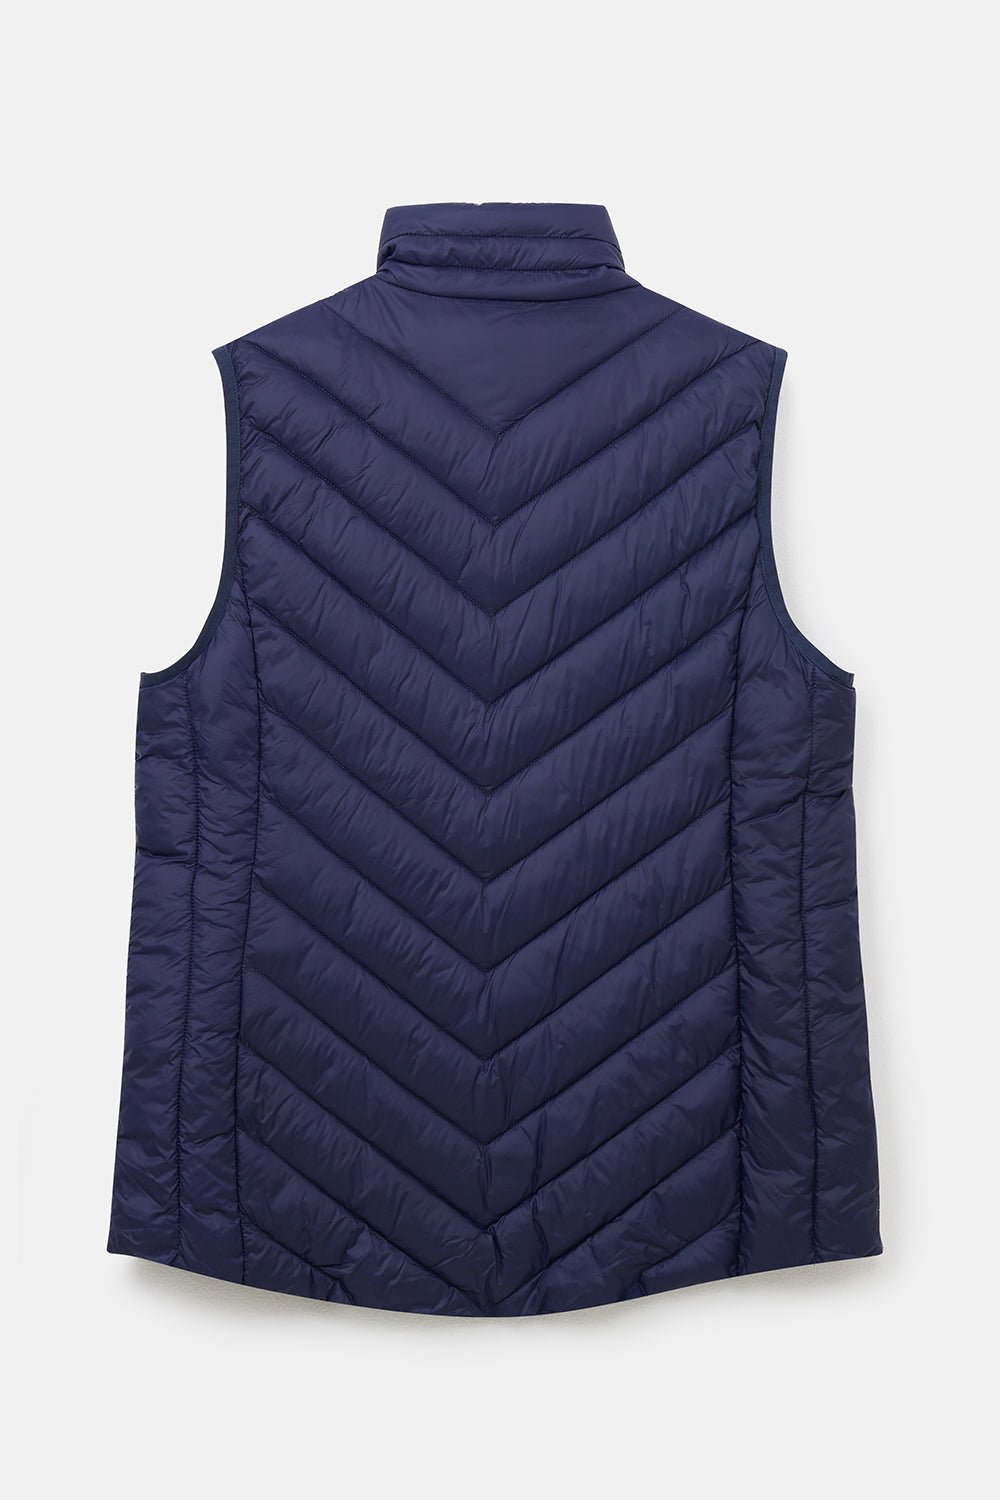 Laurel Gilet. Recycled Synthethic Insulation